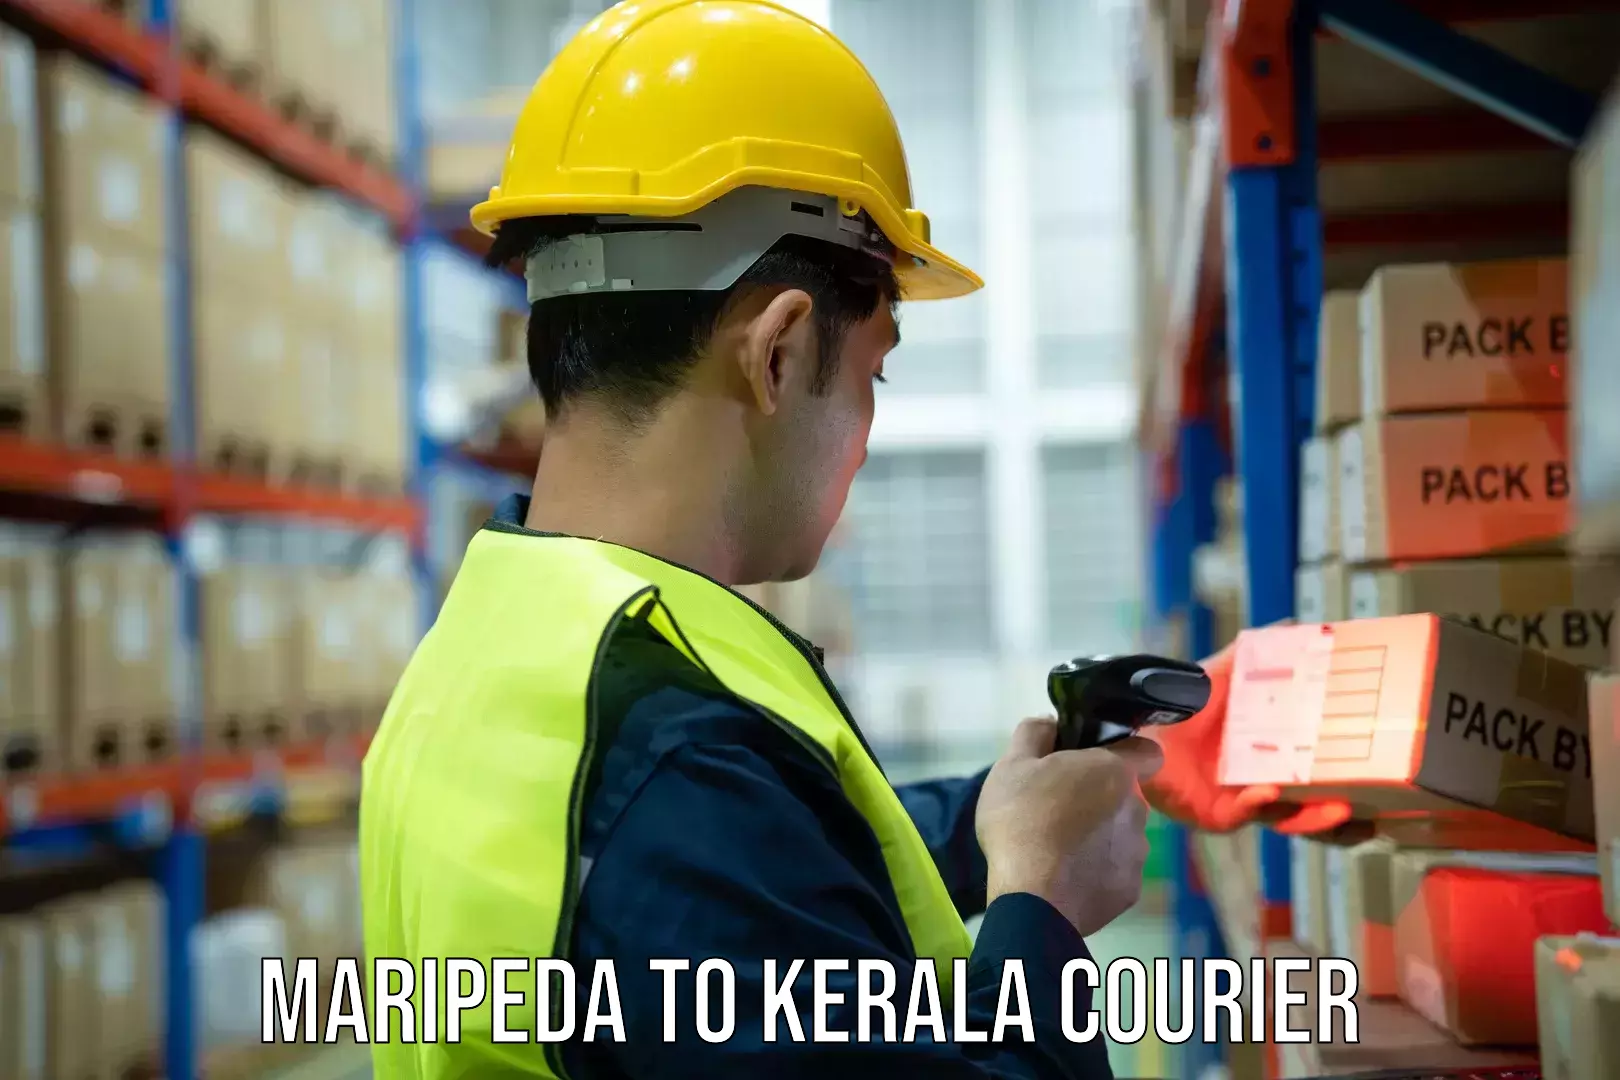 Next day courier Maripeda to Kerala